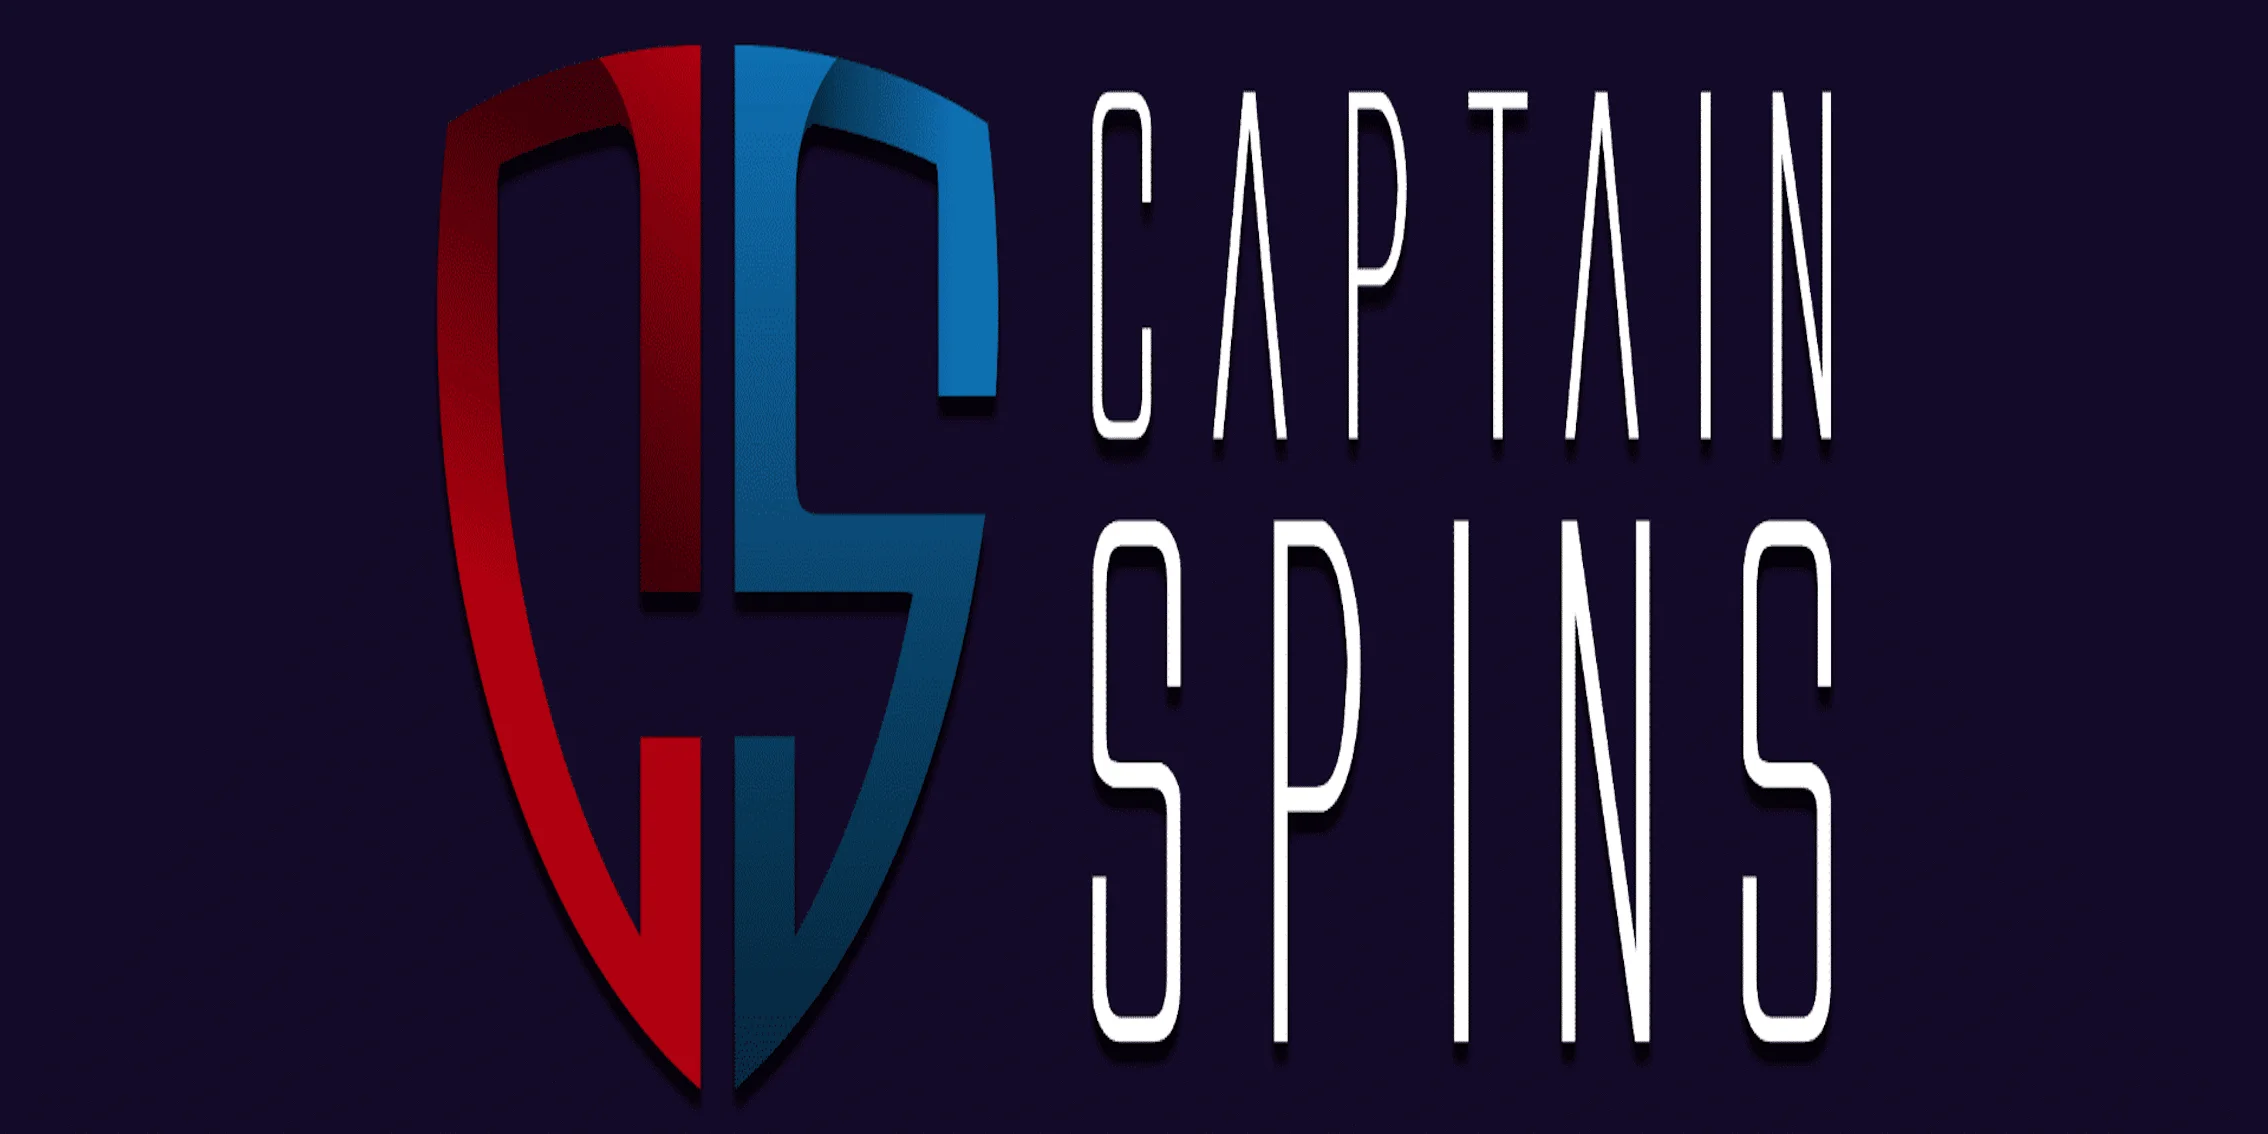 Captain Spins Casino Review